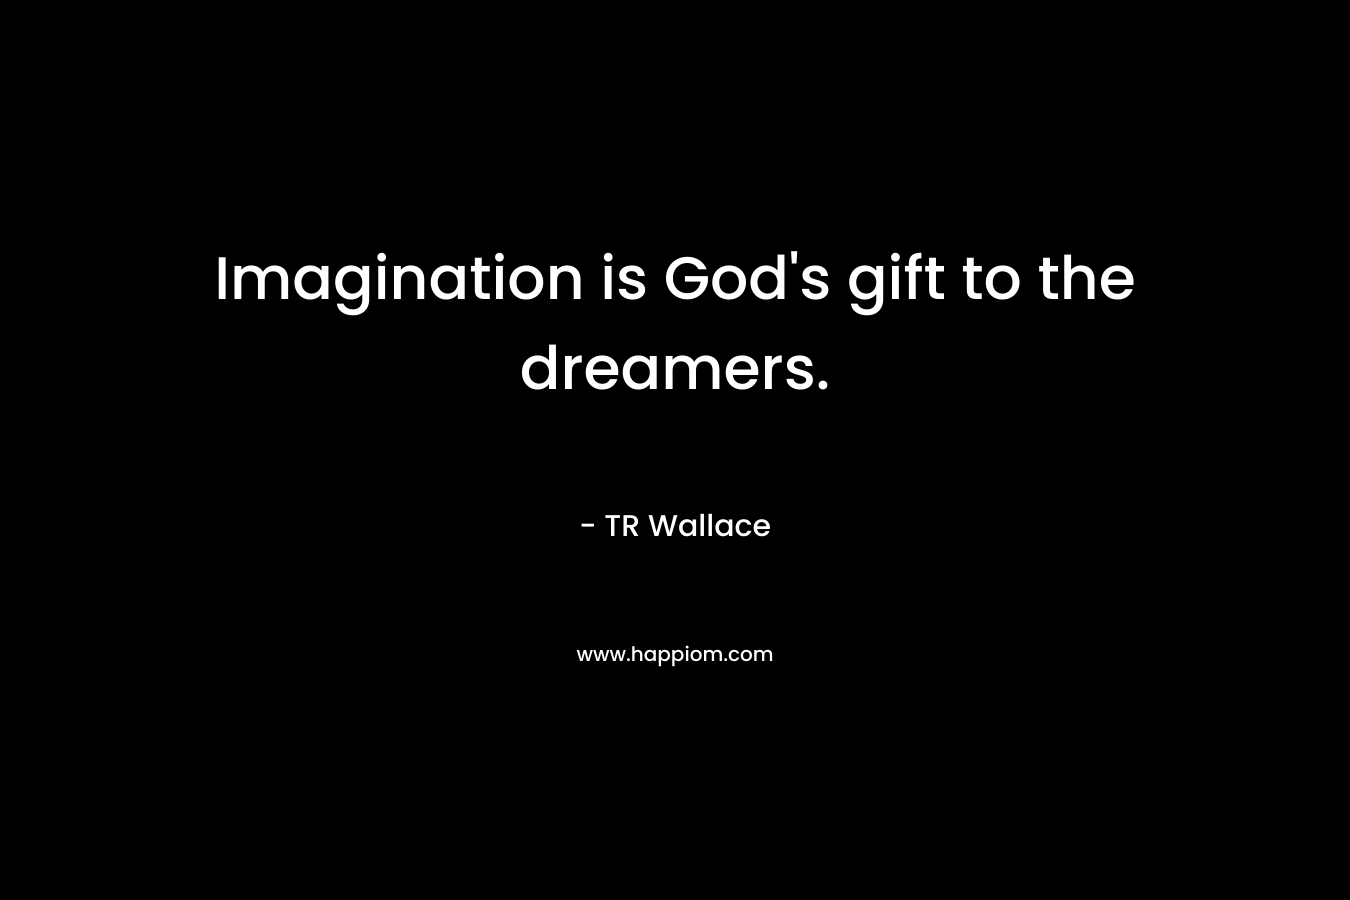 Imagination is God's gift to the dreamers.